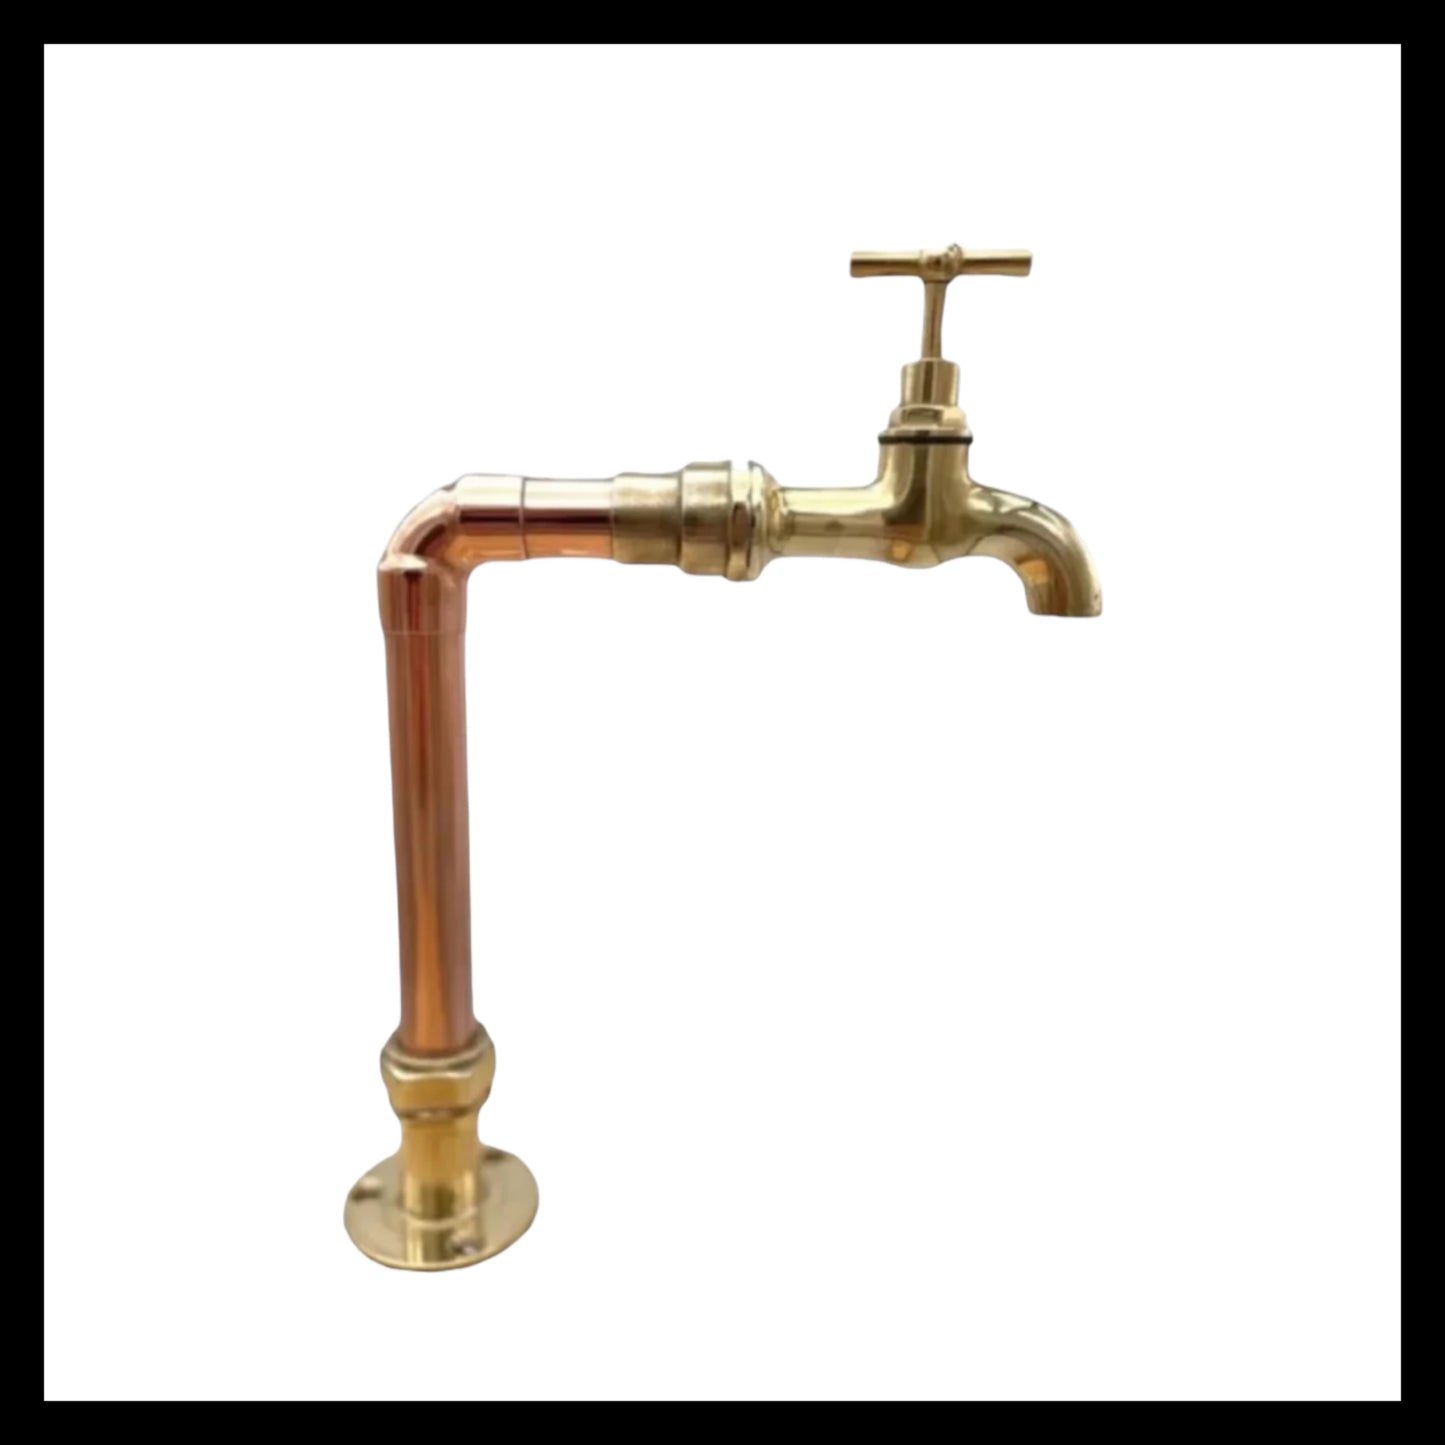 image copper and brass rustic industrial style copper and brass tap